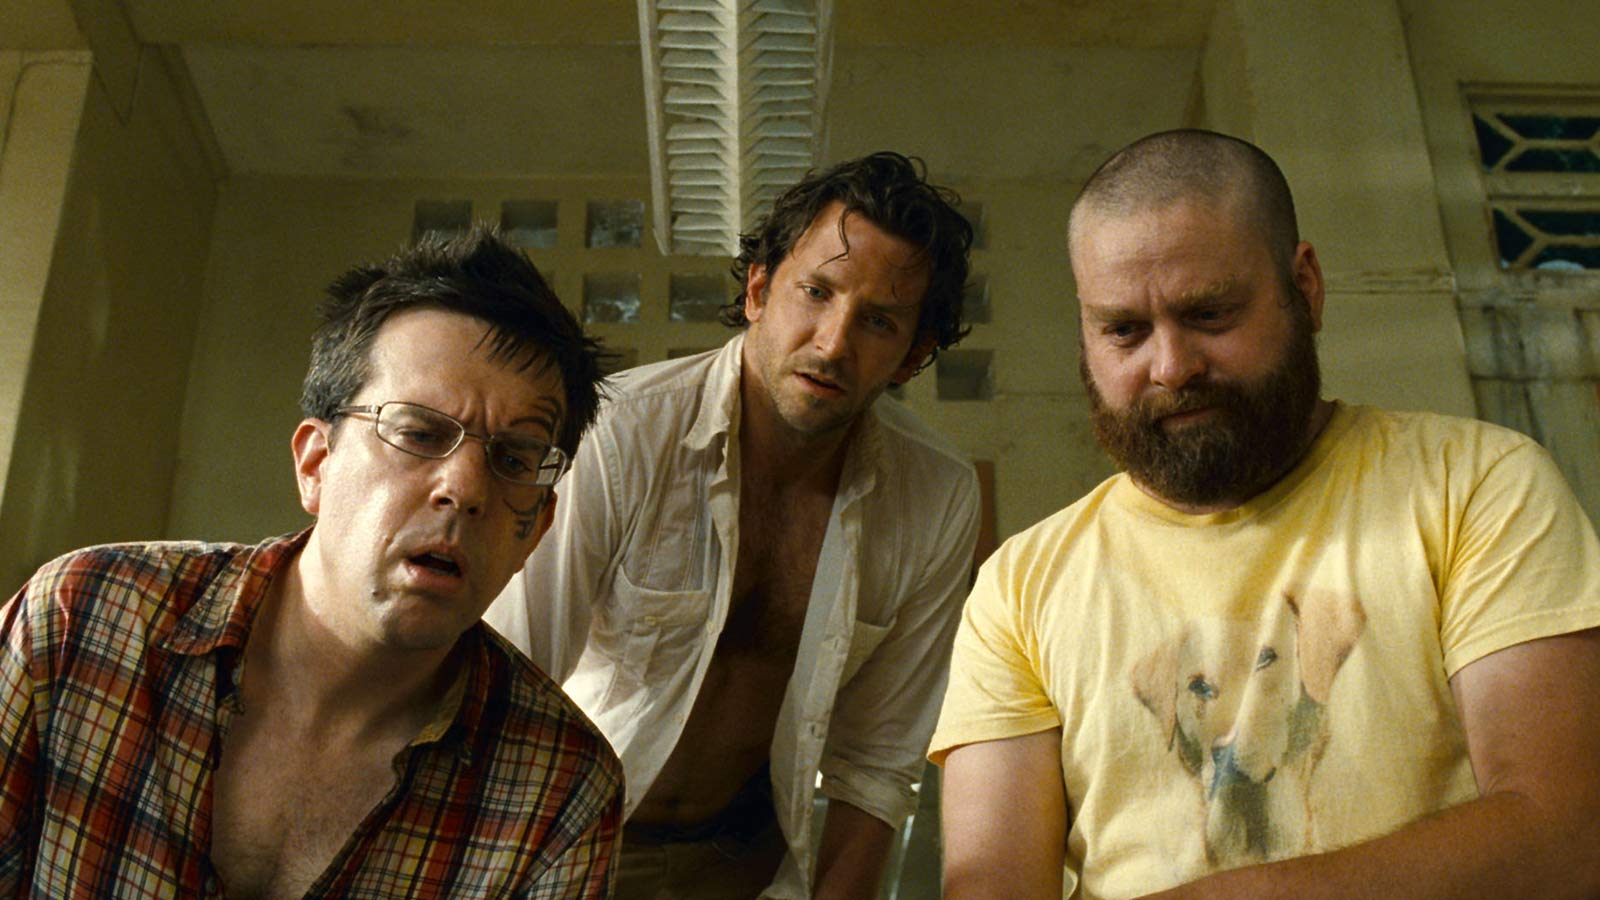 Bradley cooper, zach galifianakis and ed helms return in the second install...